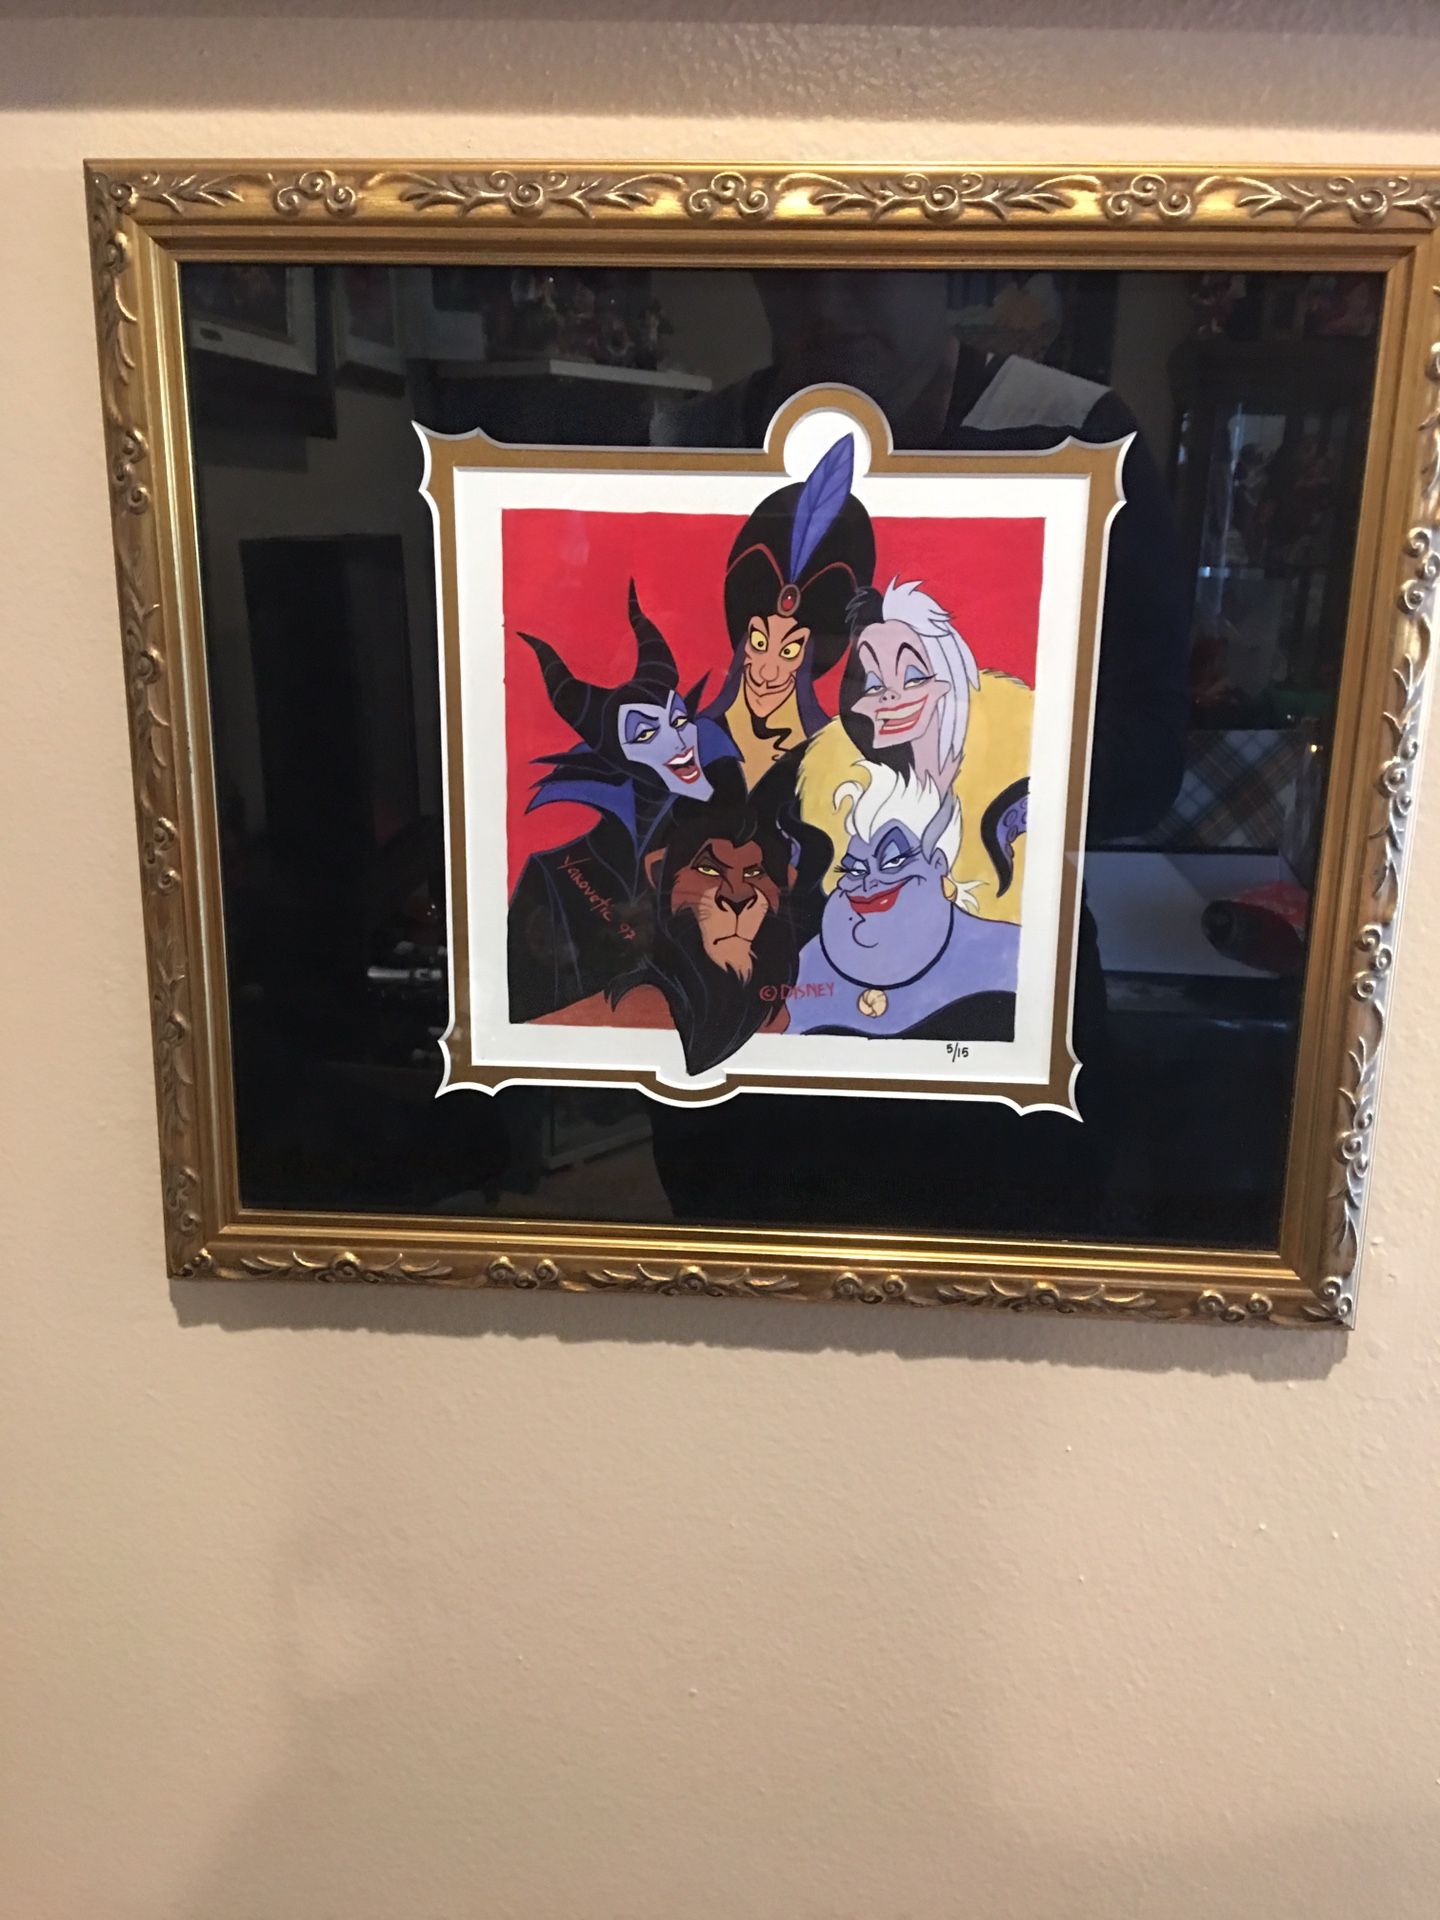 NEW! Disney Villains 5/15 Limited Edition Collectible Frame